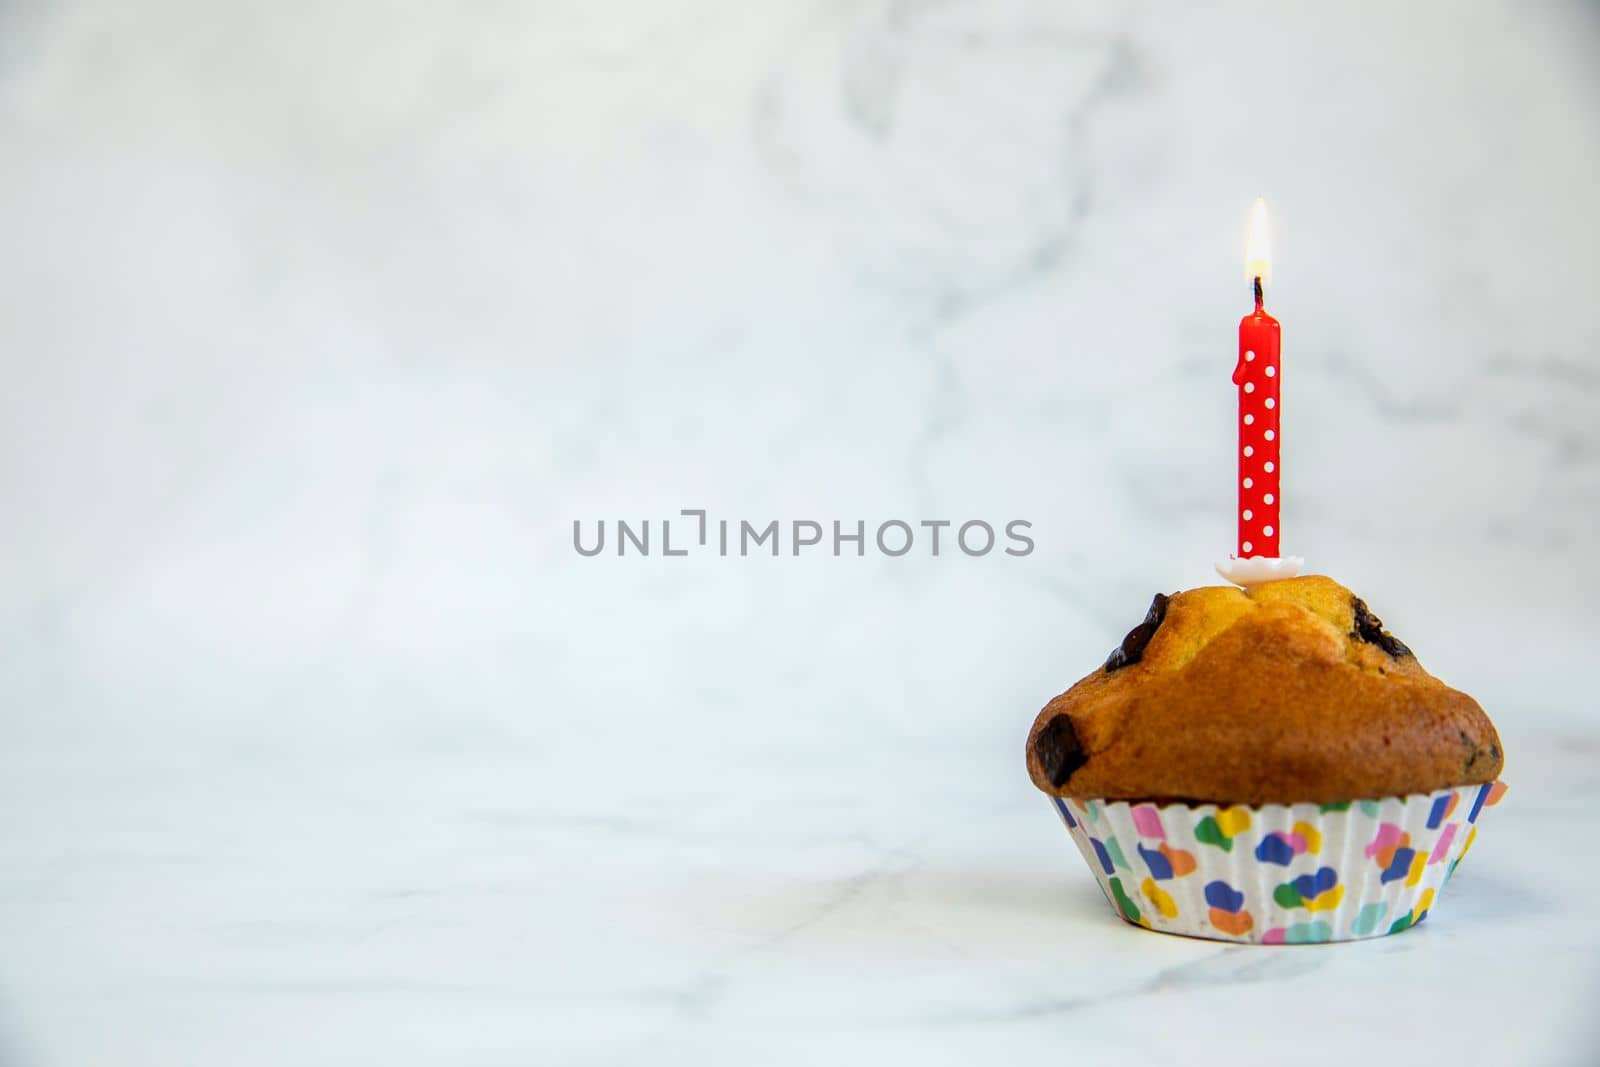 Birthday cupcake with and one red birthday cake candle on a white background with copyspace to side, Happy Birthday, party concept by Annebel146